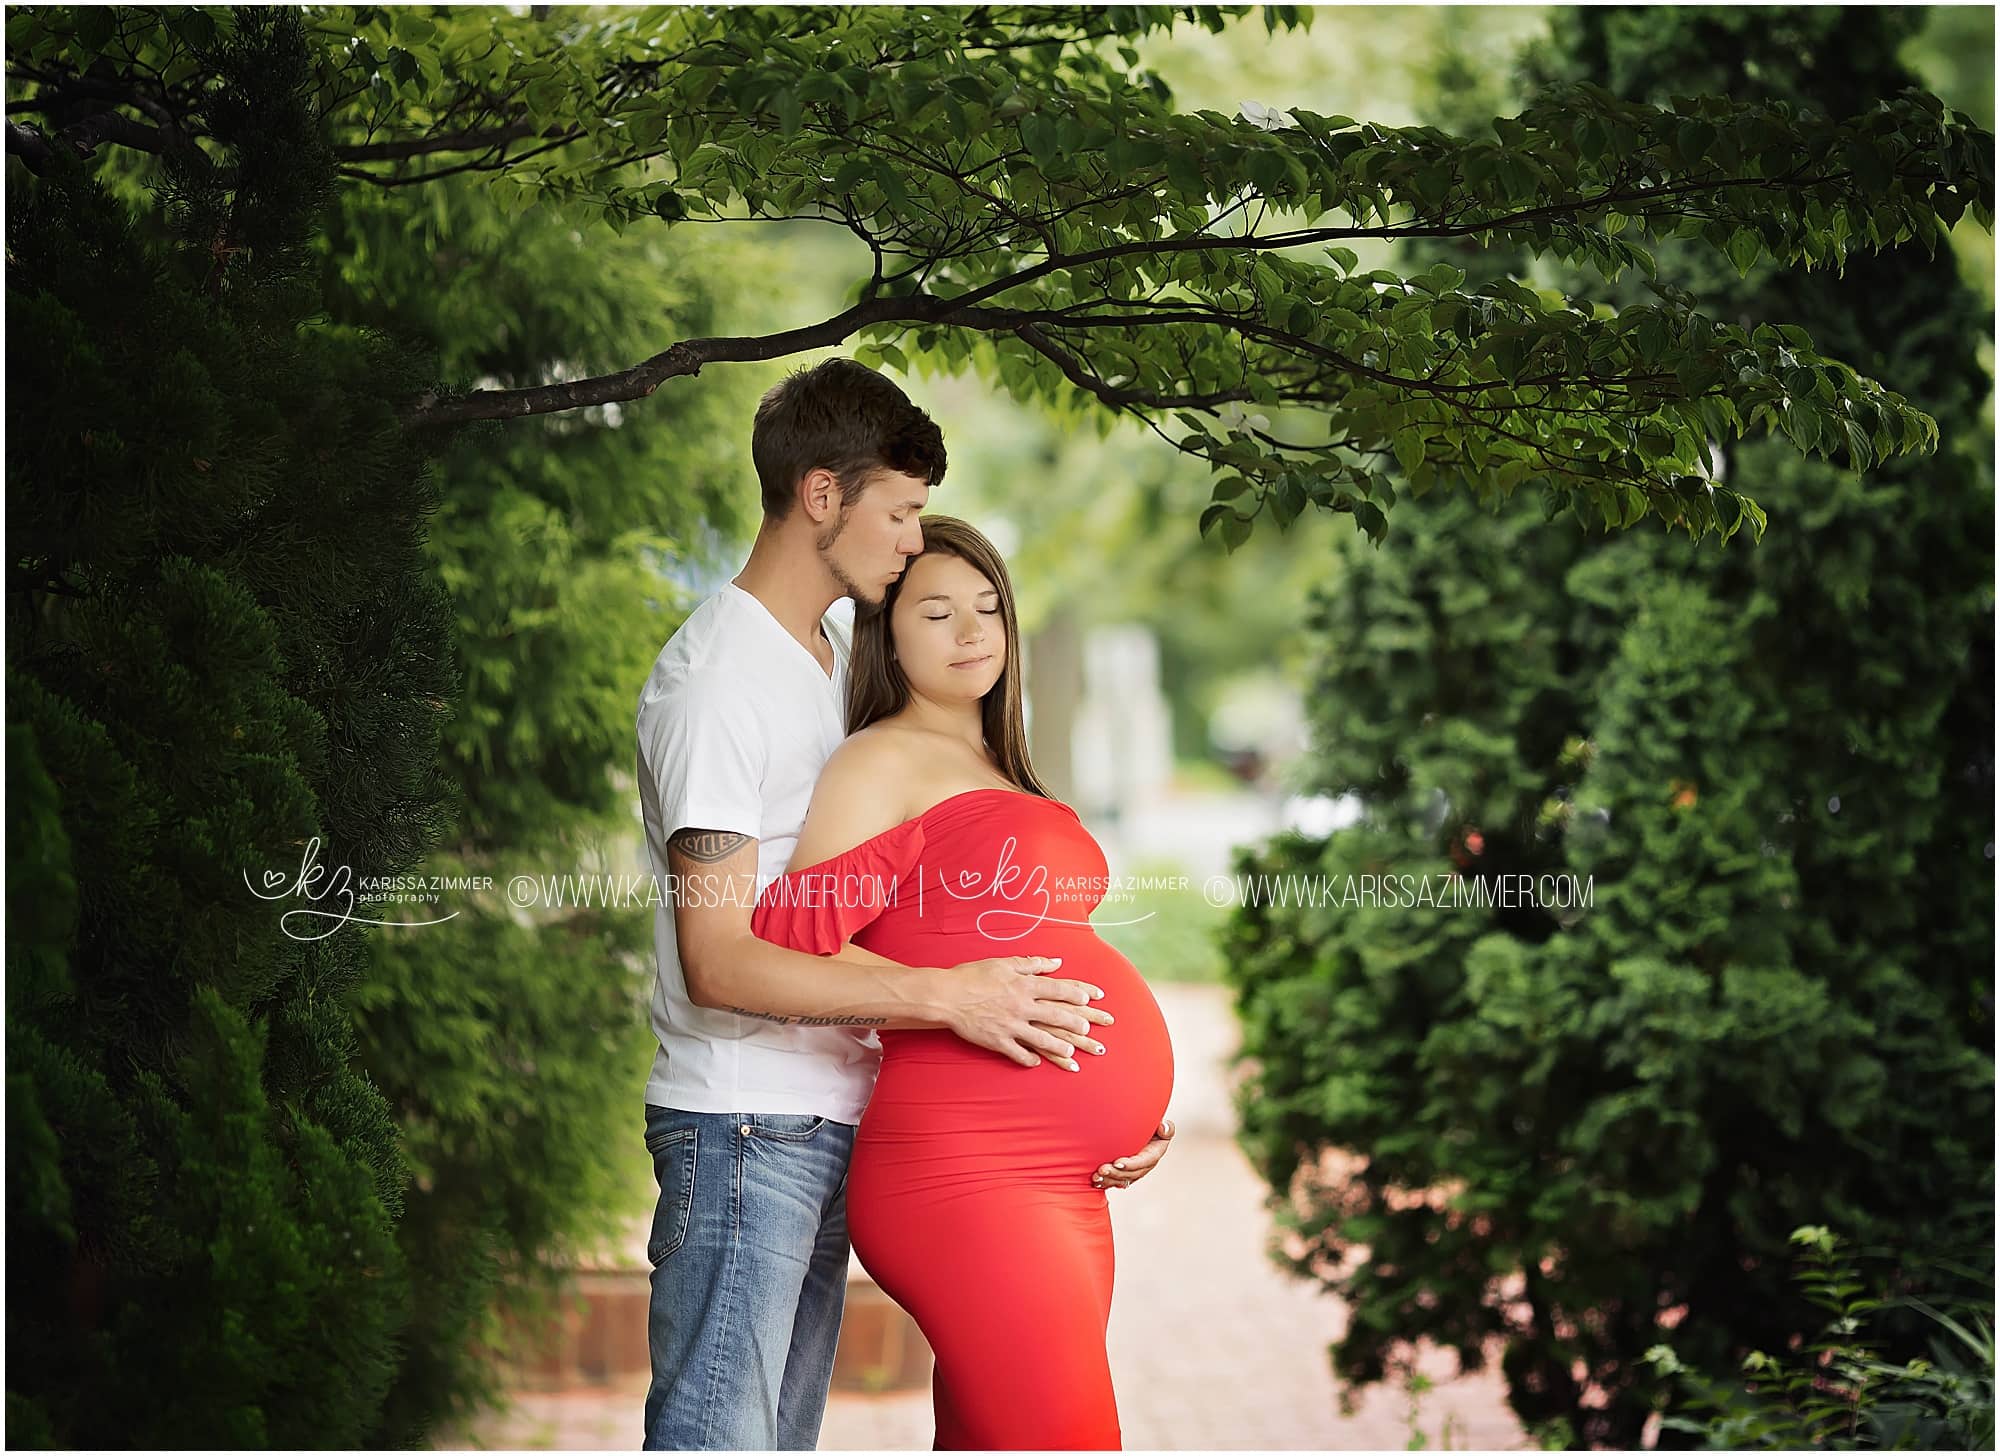 camp hill maternity photos, maternity photoshoot near me, professional pregnancy photography, camp hill maternity photographer